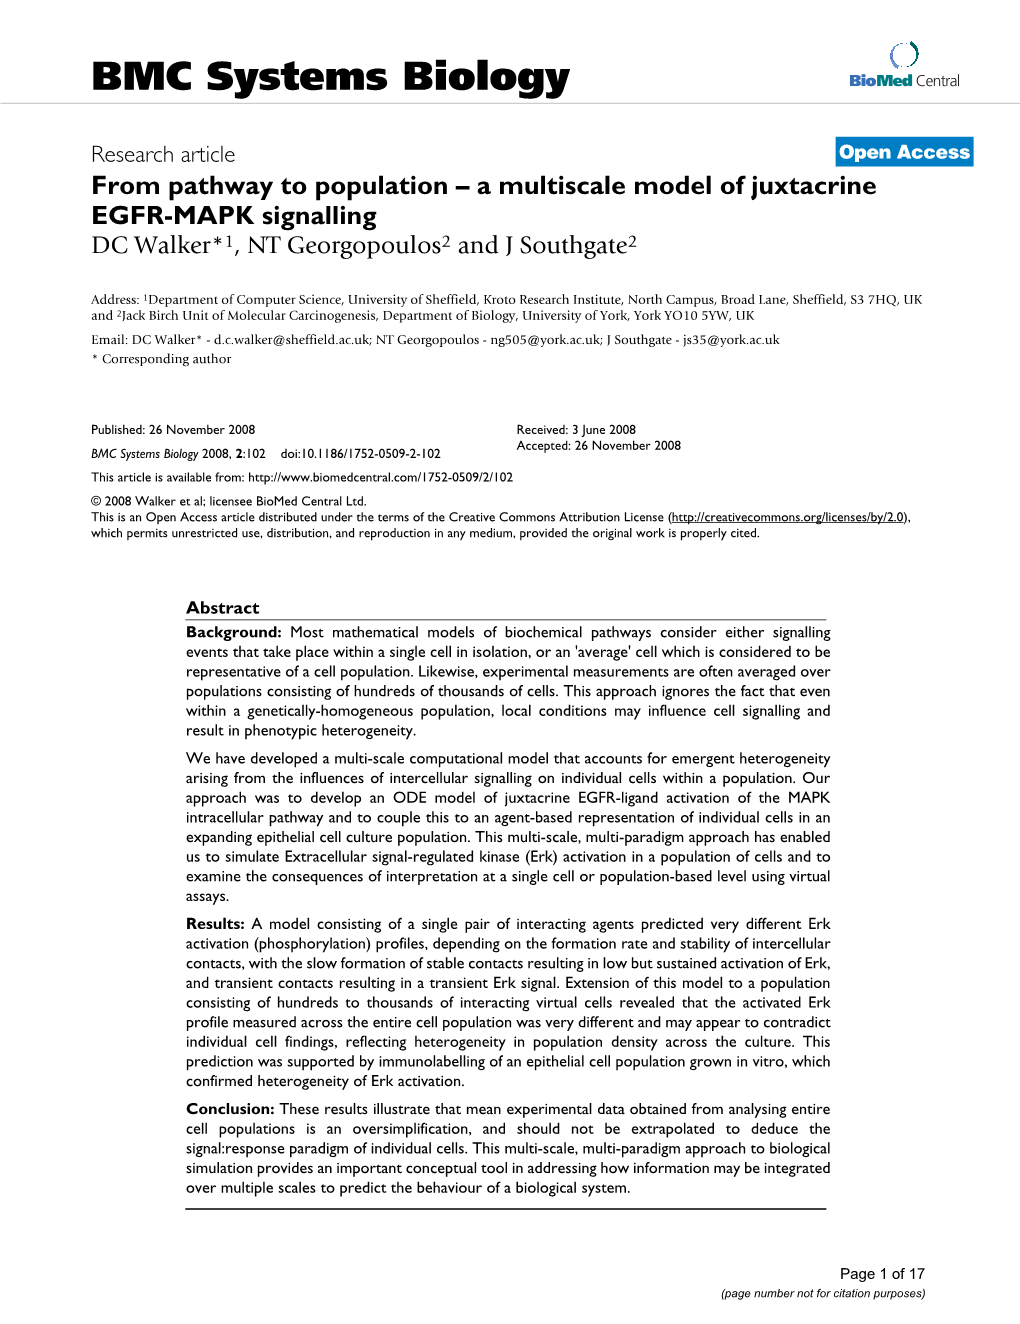 From Pathway to Population–A Multiscale Model of Juxtacrine